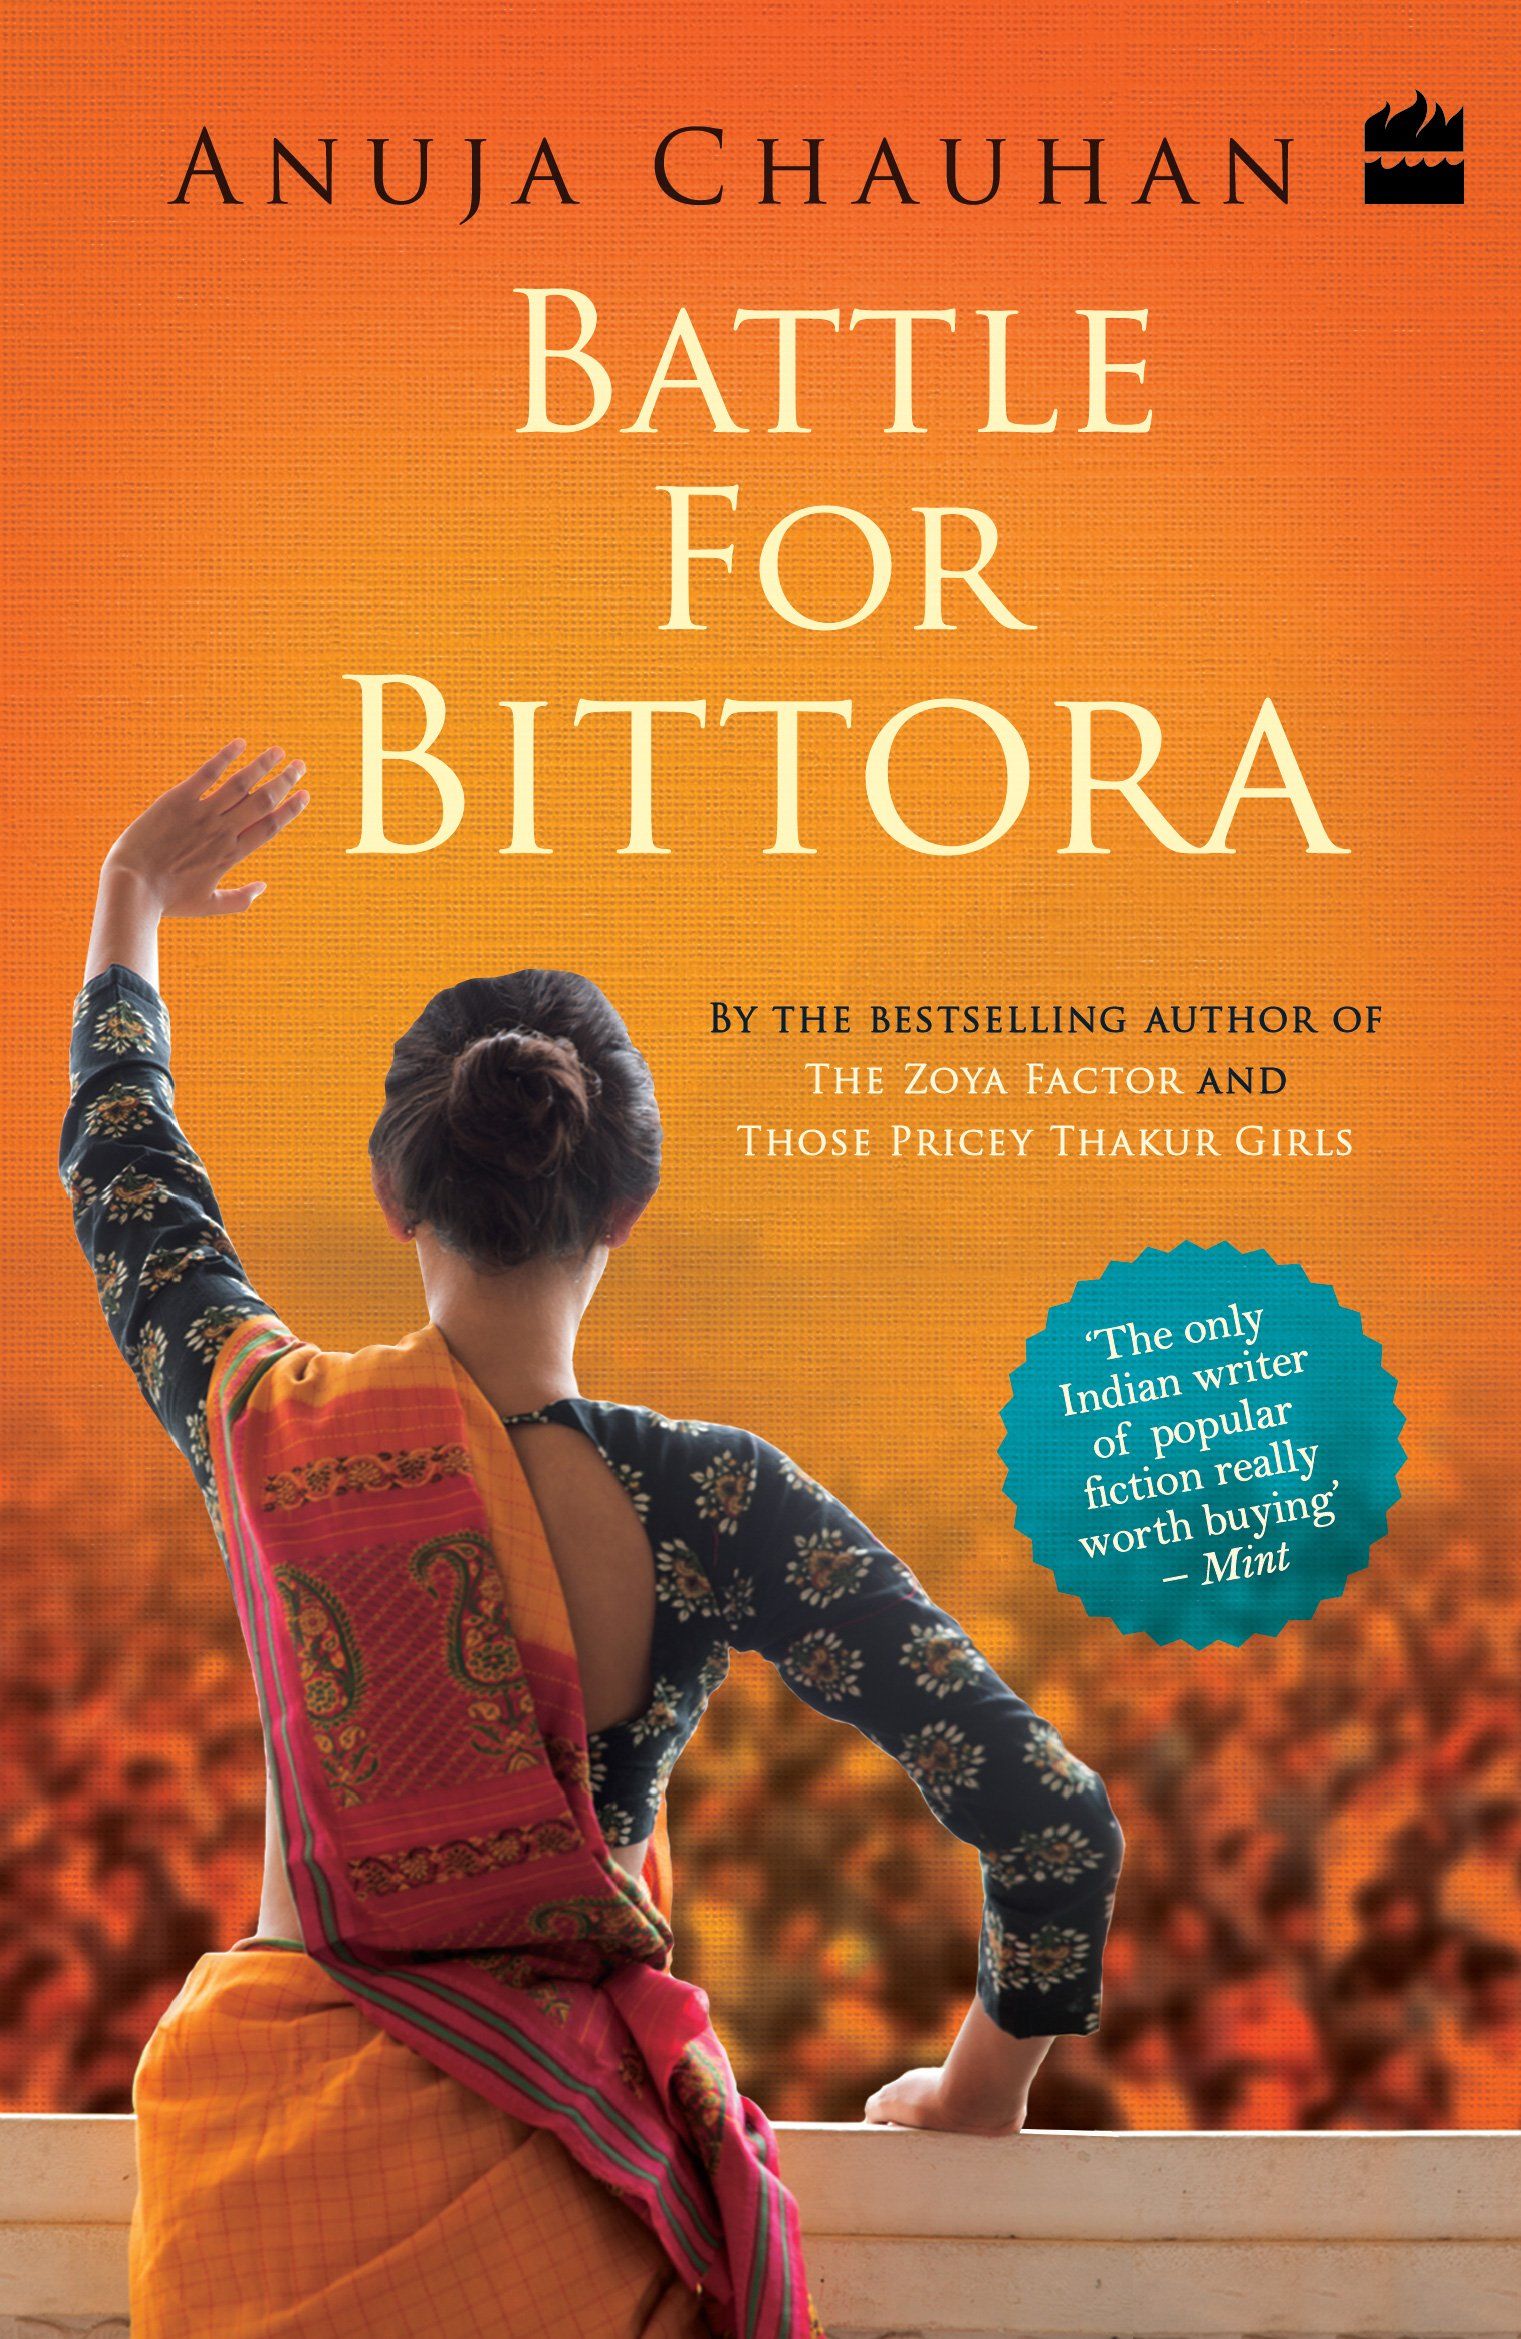 Cover of Battle for Bittora by Anuja Chauhan